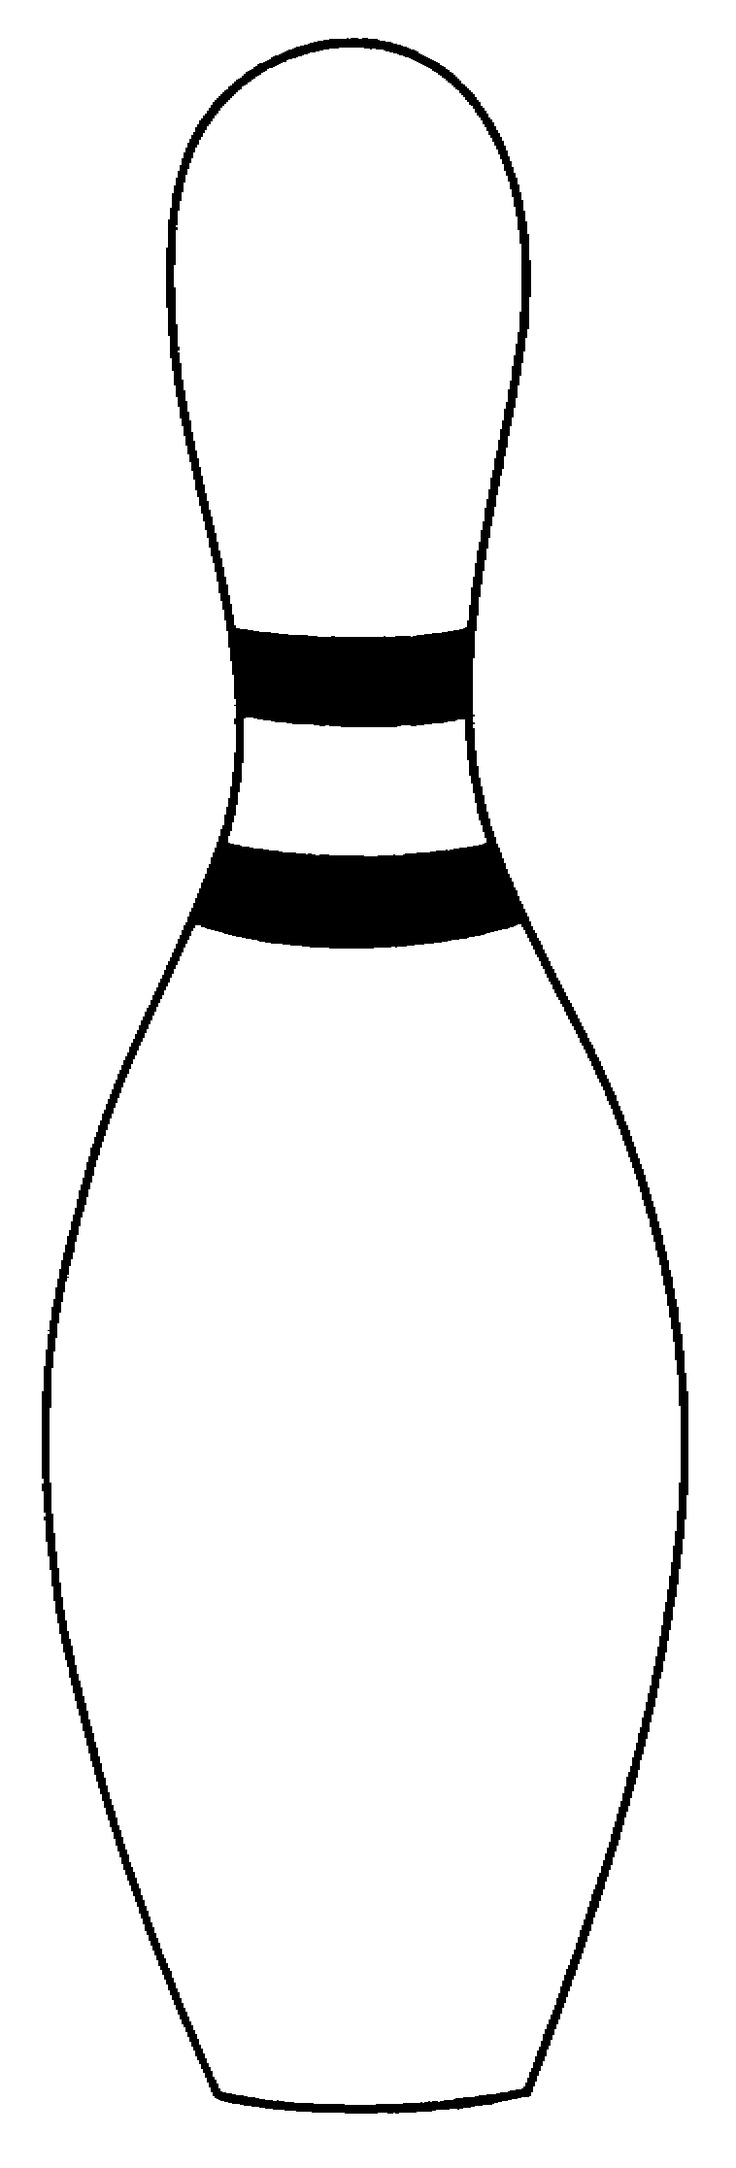 Bowling Clipart to Download